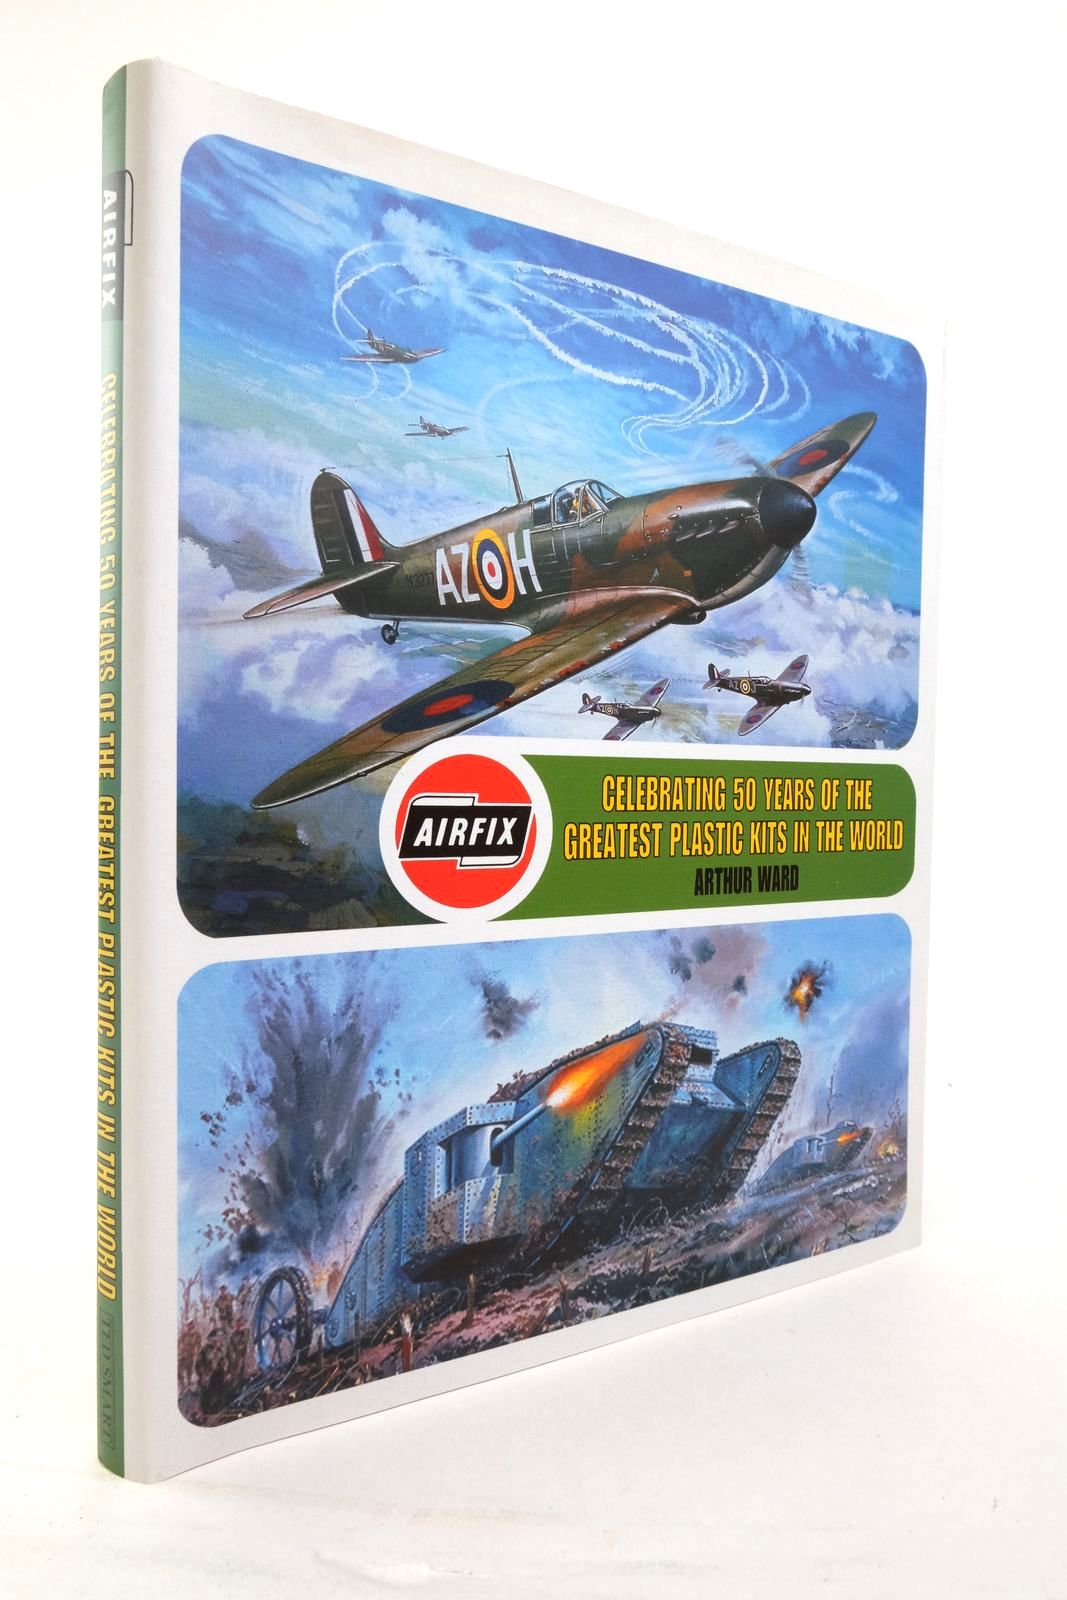 Photo of AIRFIX: CELEBRATING 50 YEARS OF THE WORLD'S GREATEST PLASTIC KITS written by Ward, Arthur published by Ted Smart, Harper Collins (STOCK CODE: 2137702)  for sale by Stella & Rose's Books